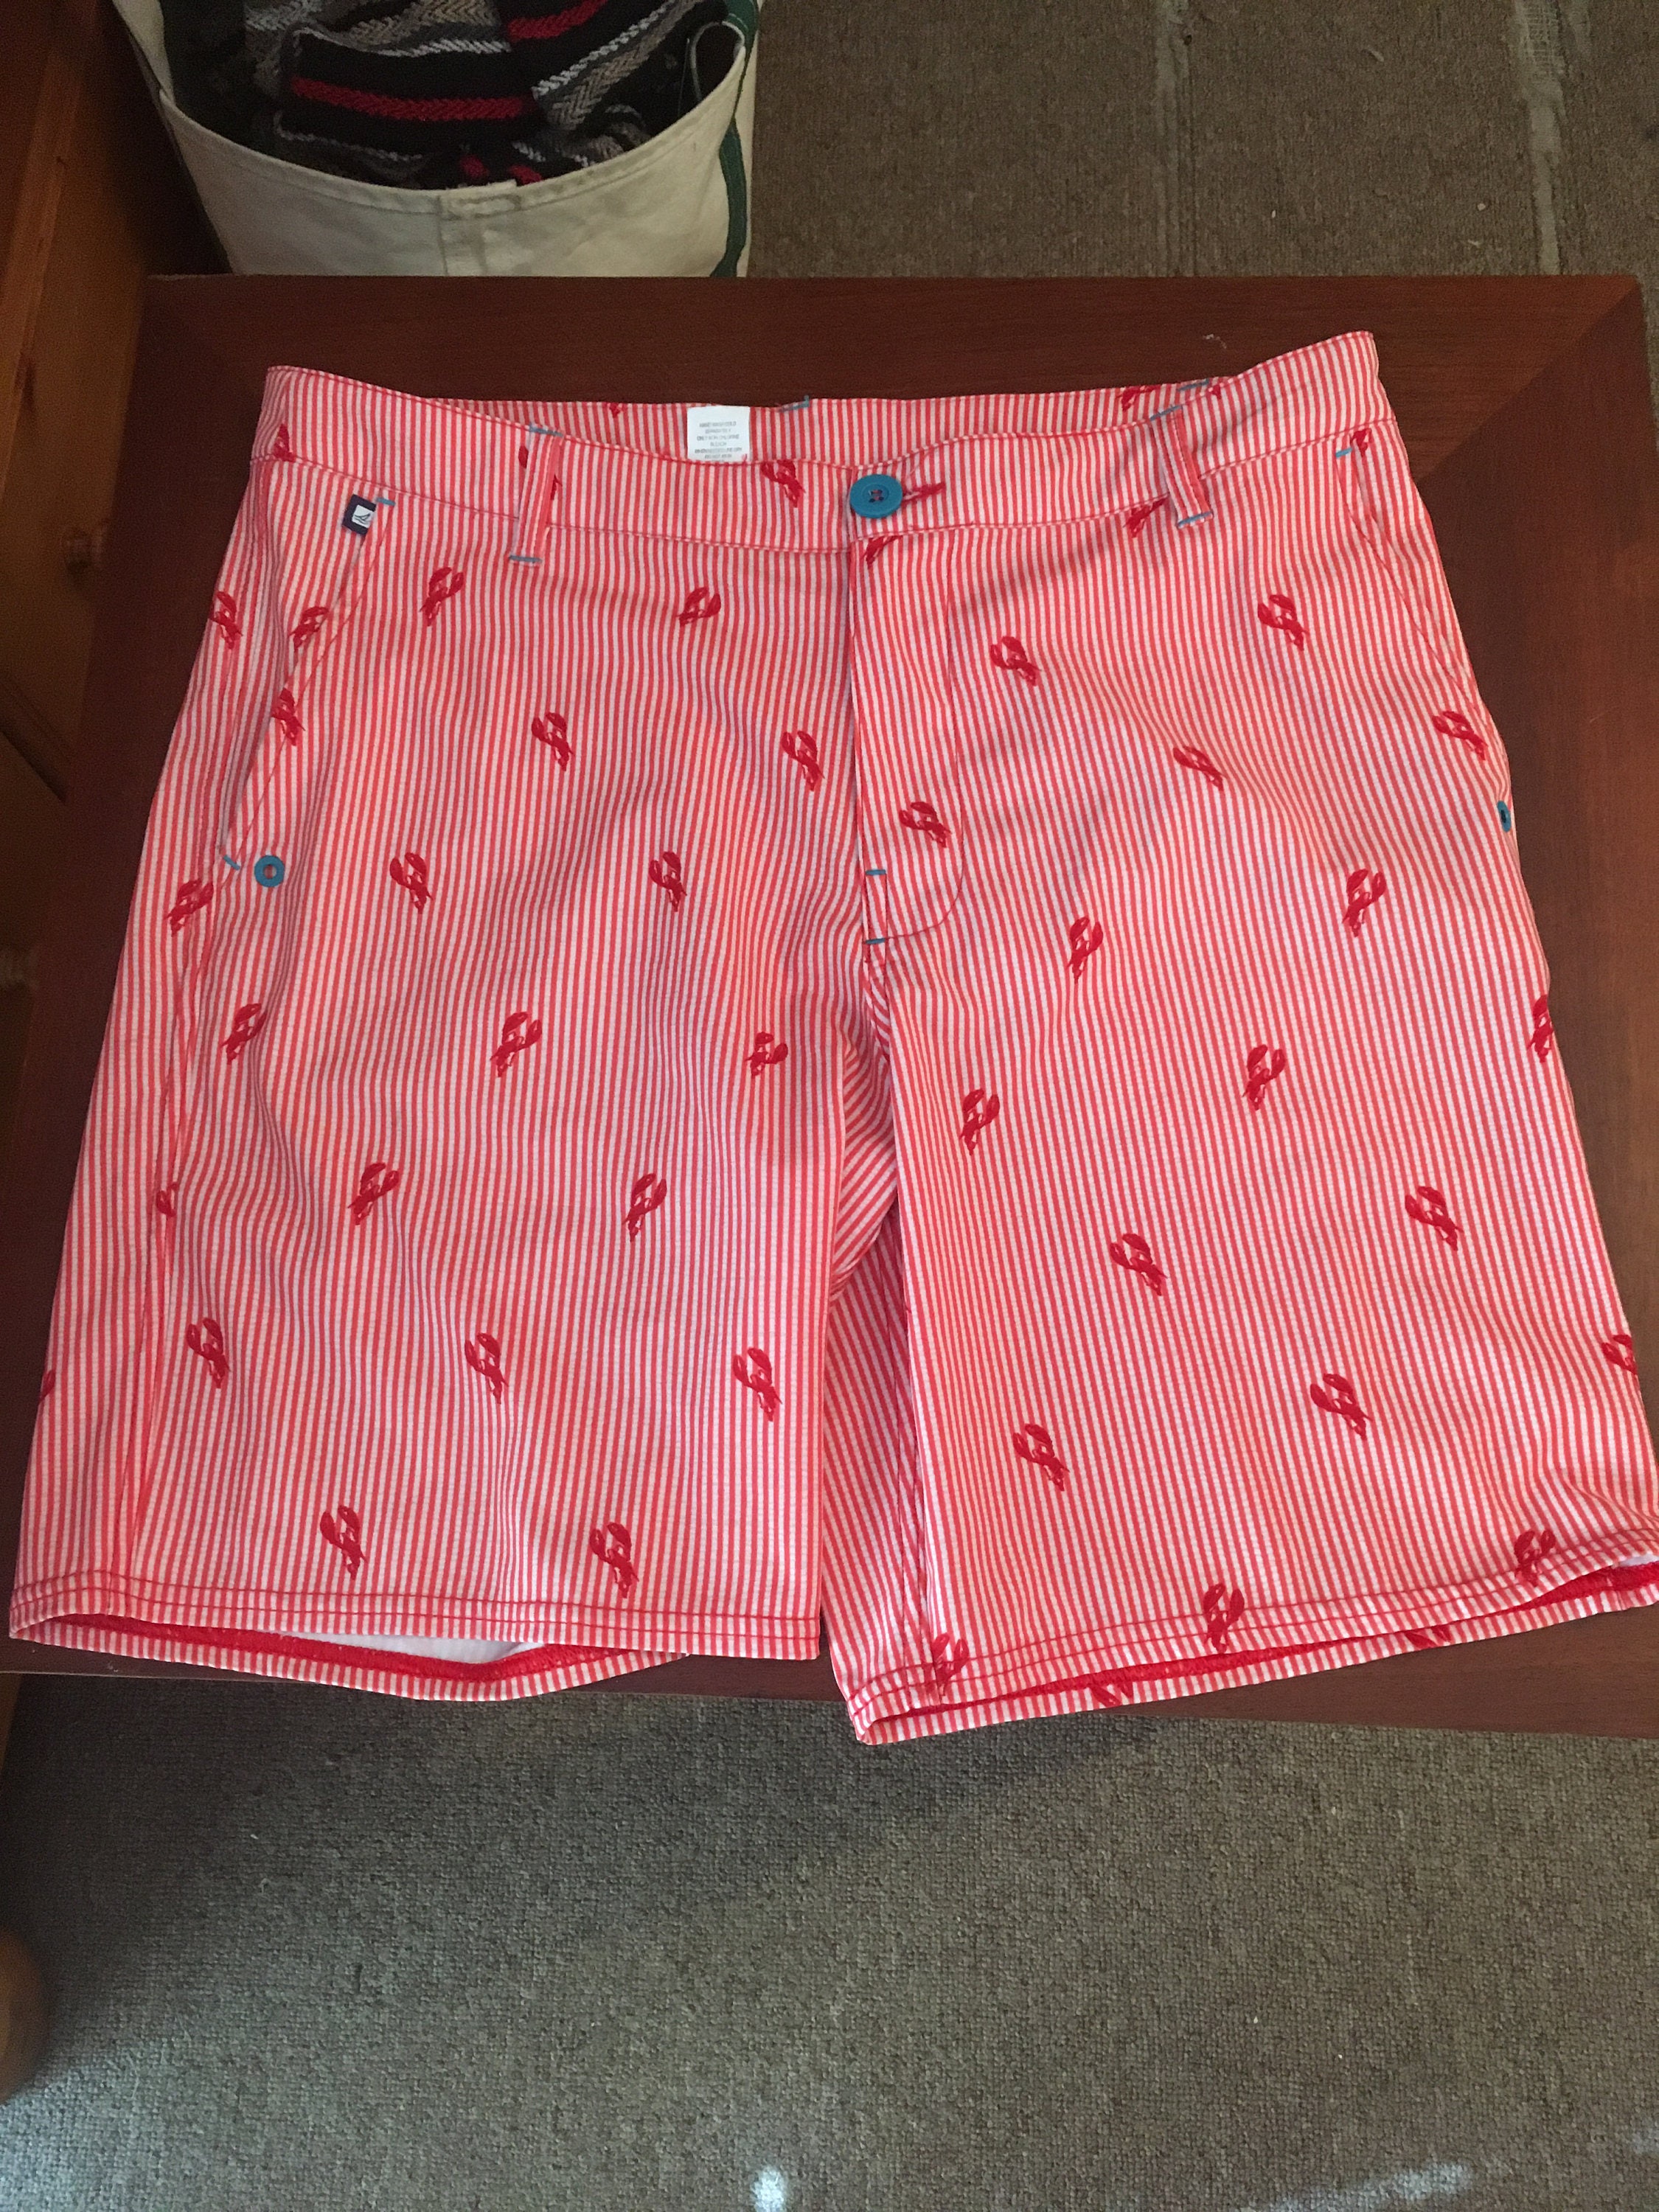 Sperry shorts